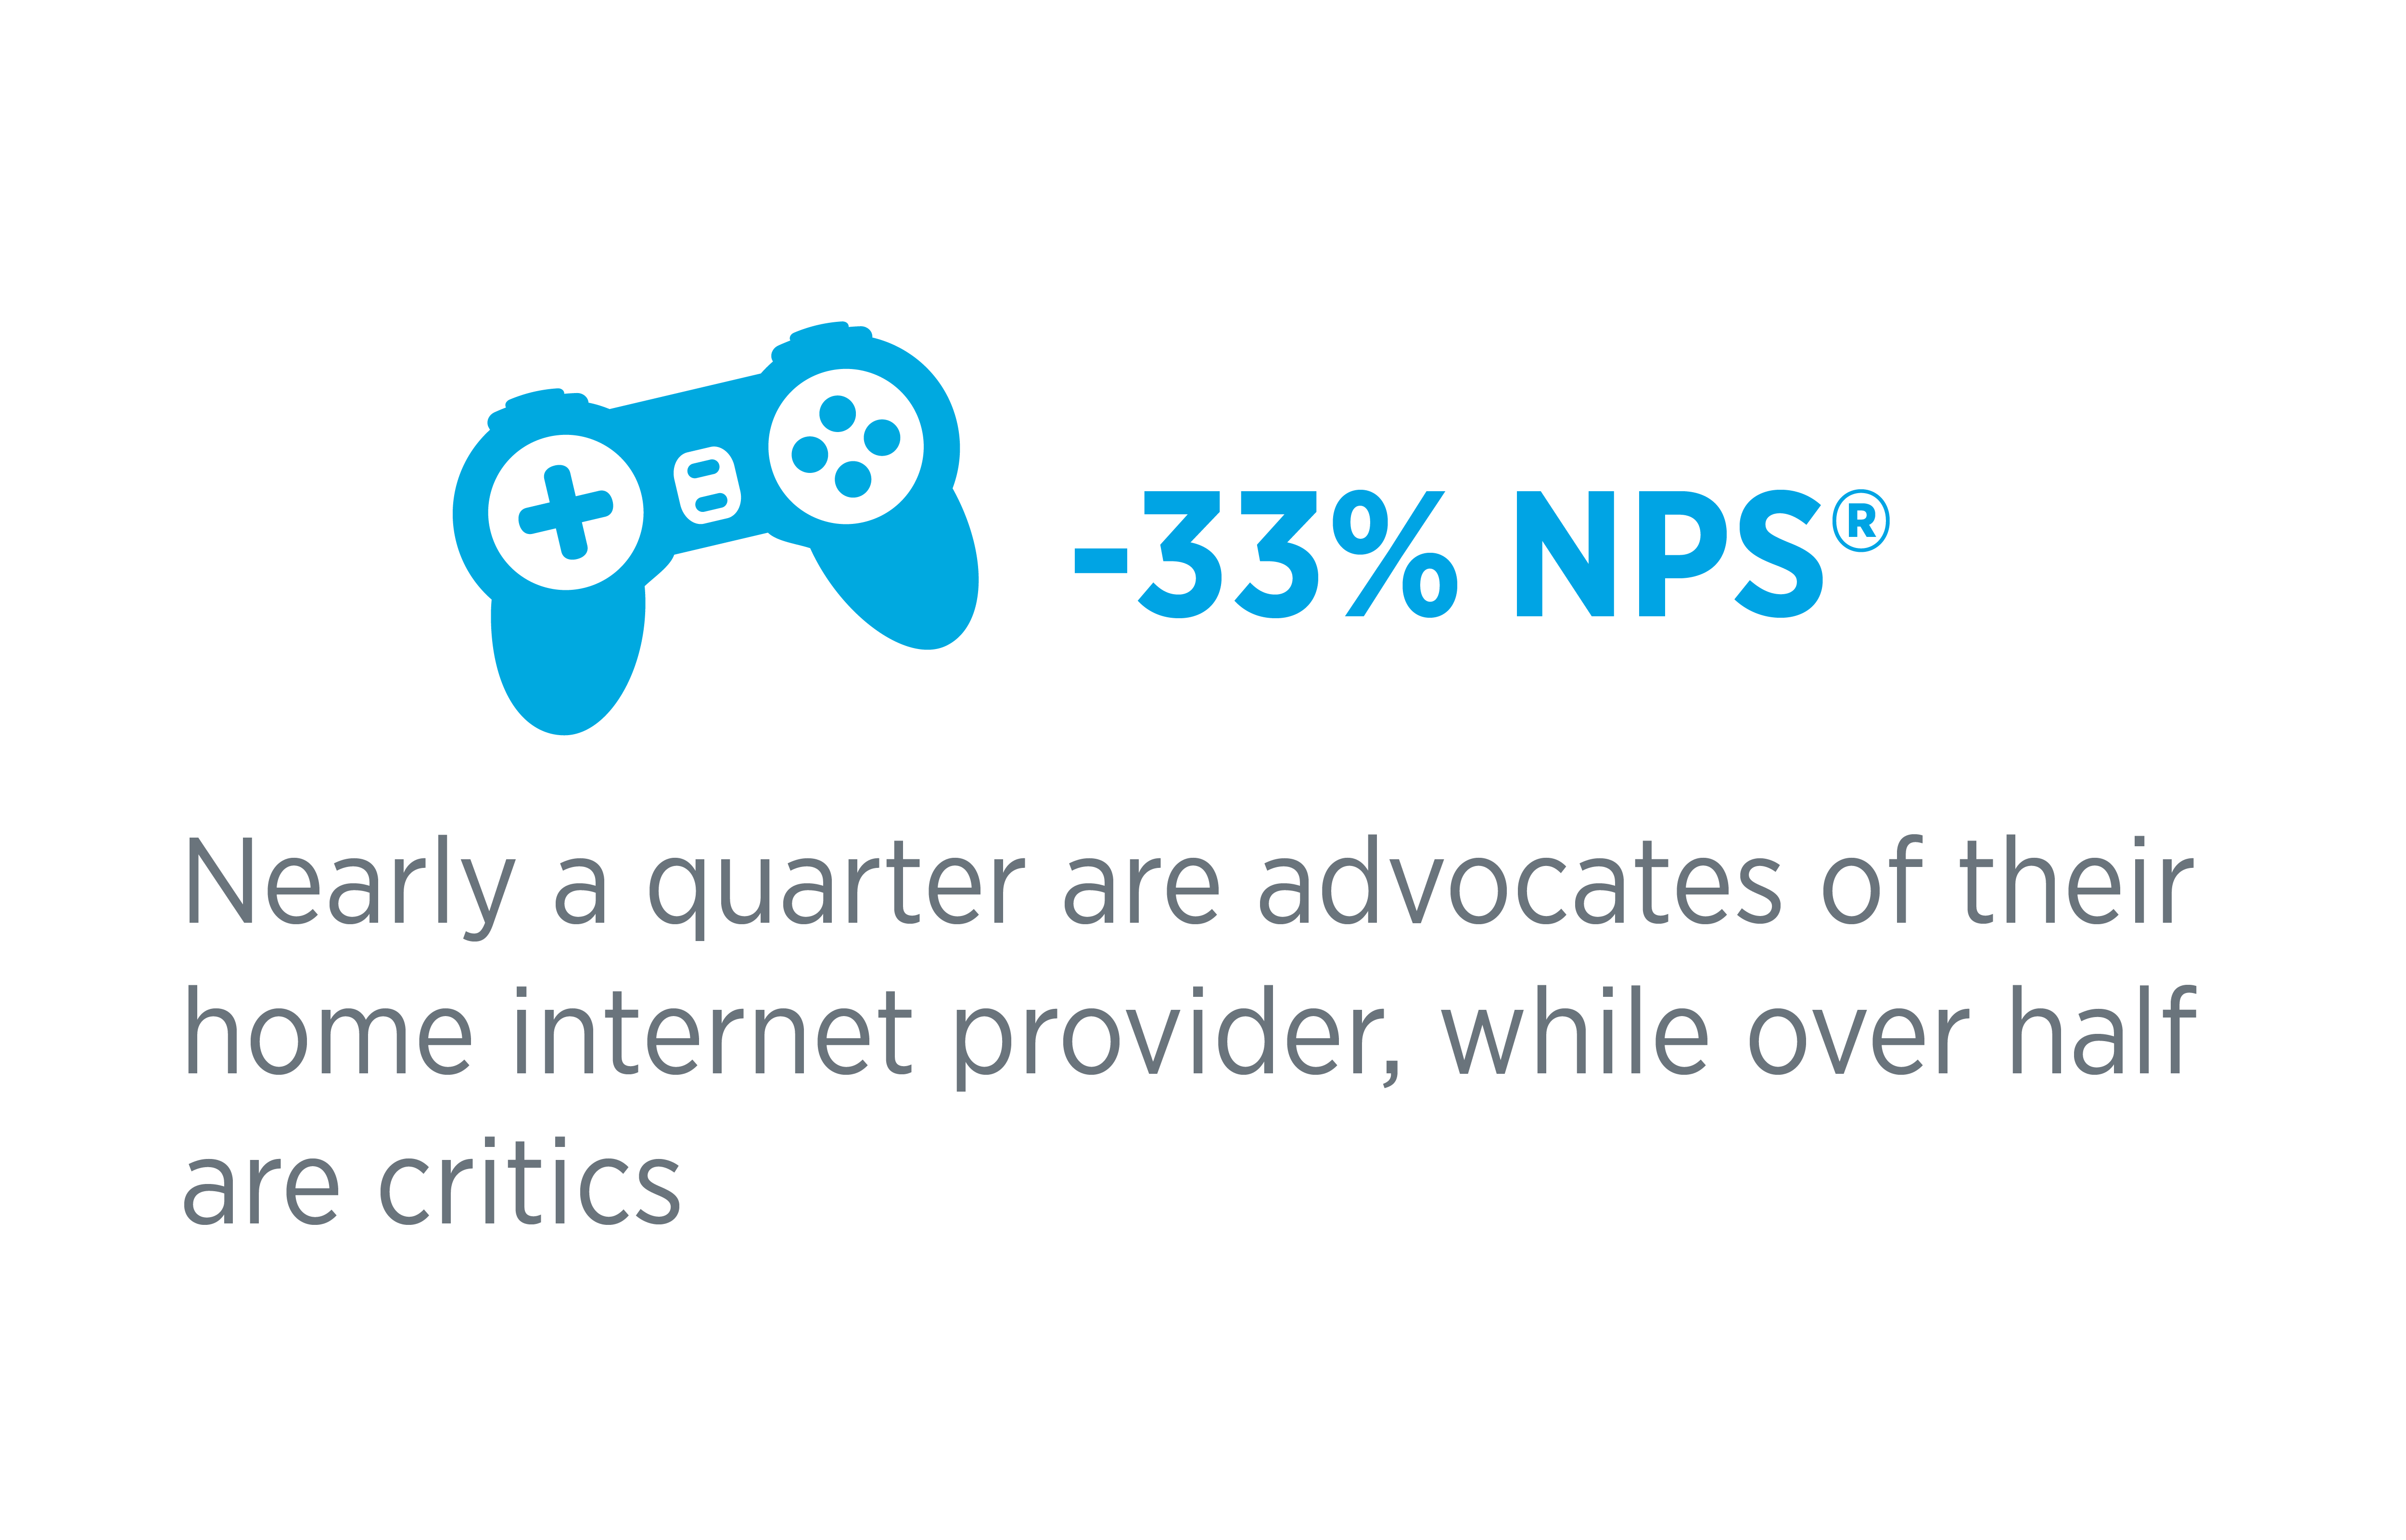 nearly a quarter are advocates of their home internet provider, while over half are critics